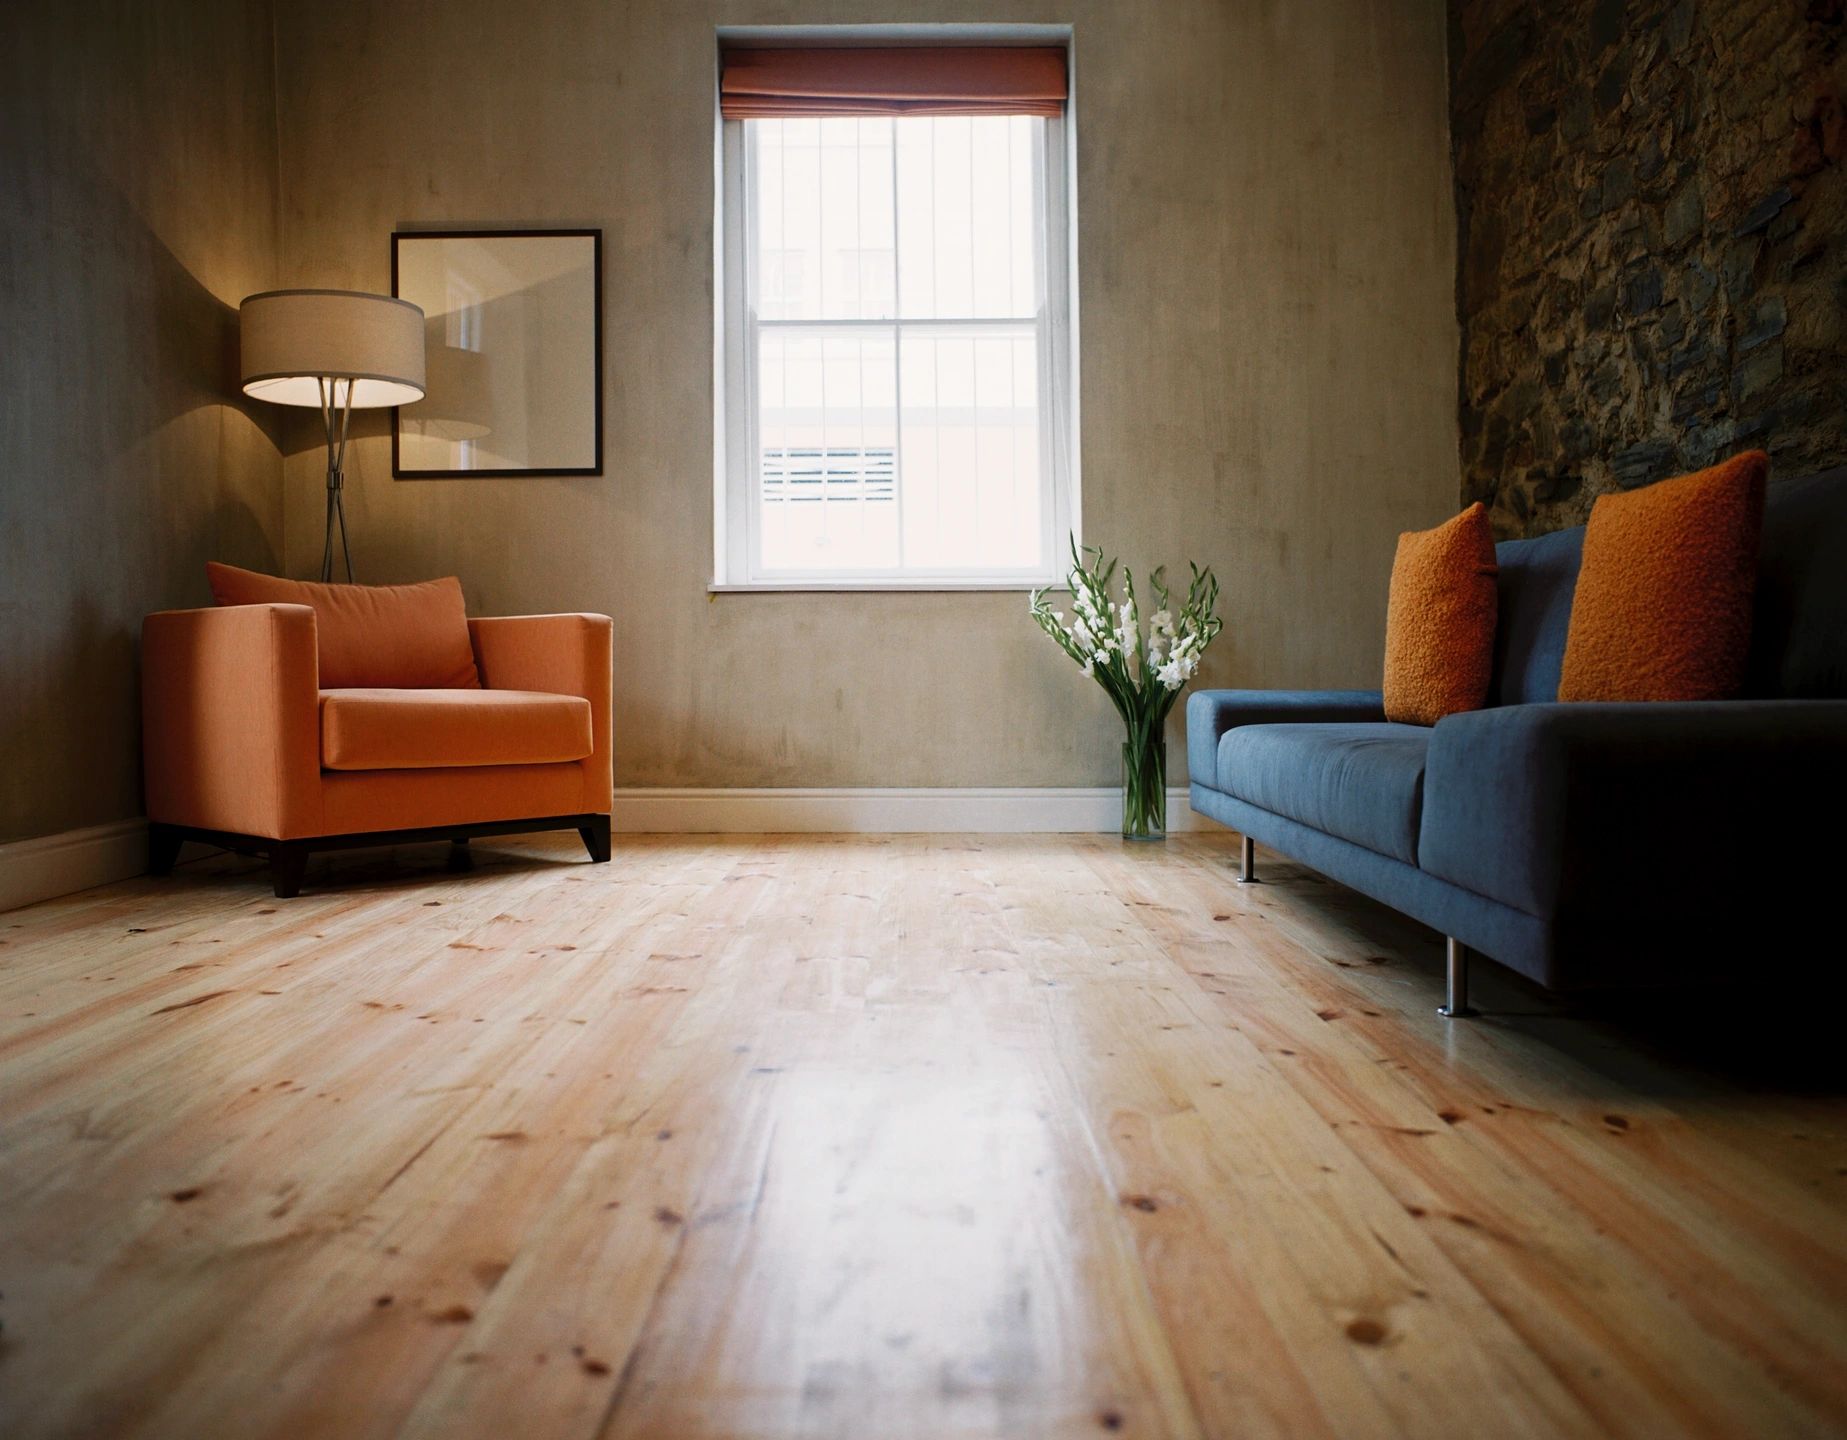 For aesthetically appealing floors, Global Clean services in the Toronto and Greater Toronto Area. For instance, we provide floor stripping, floor waxing and floor buffing services. 